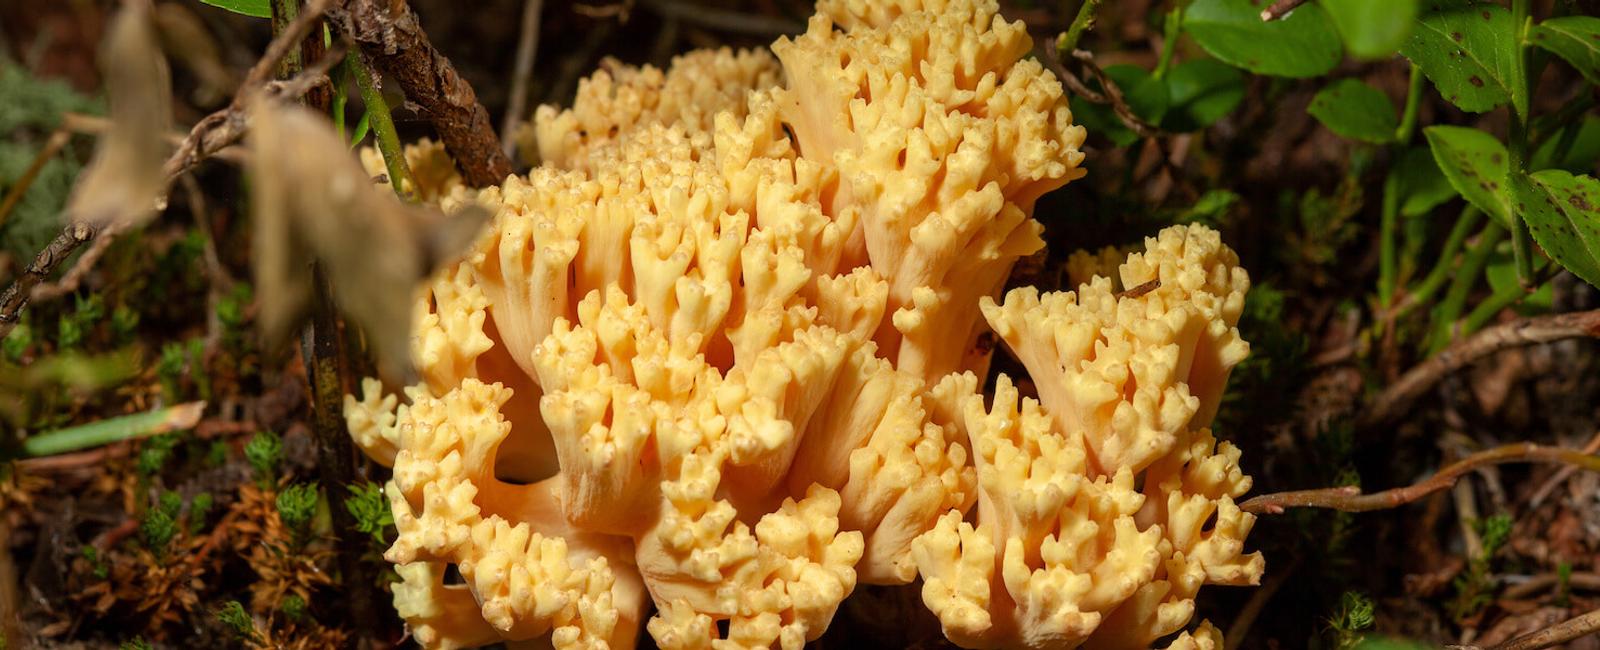 The Complete Guide to Coral Mushrooms